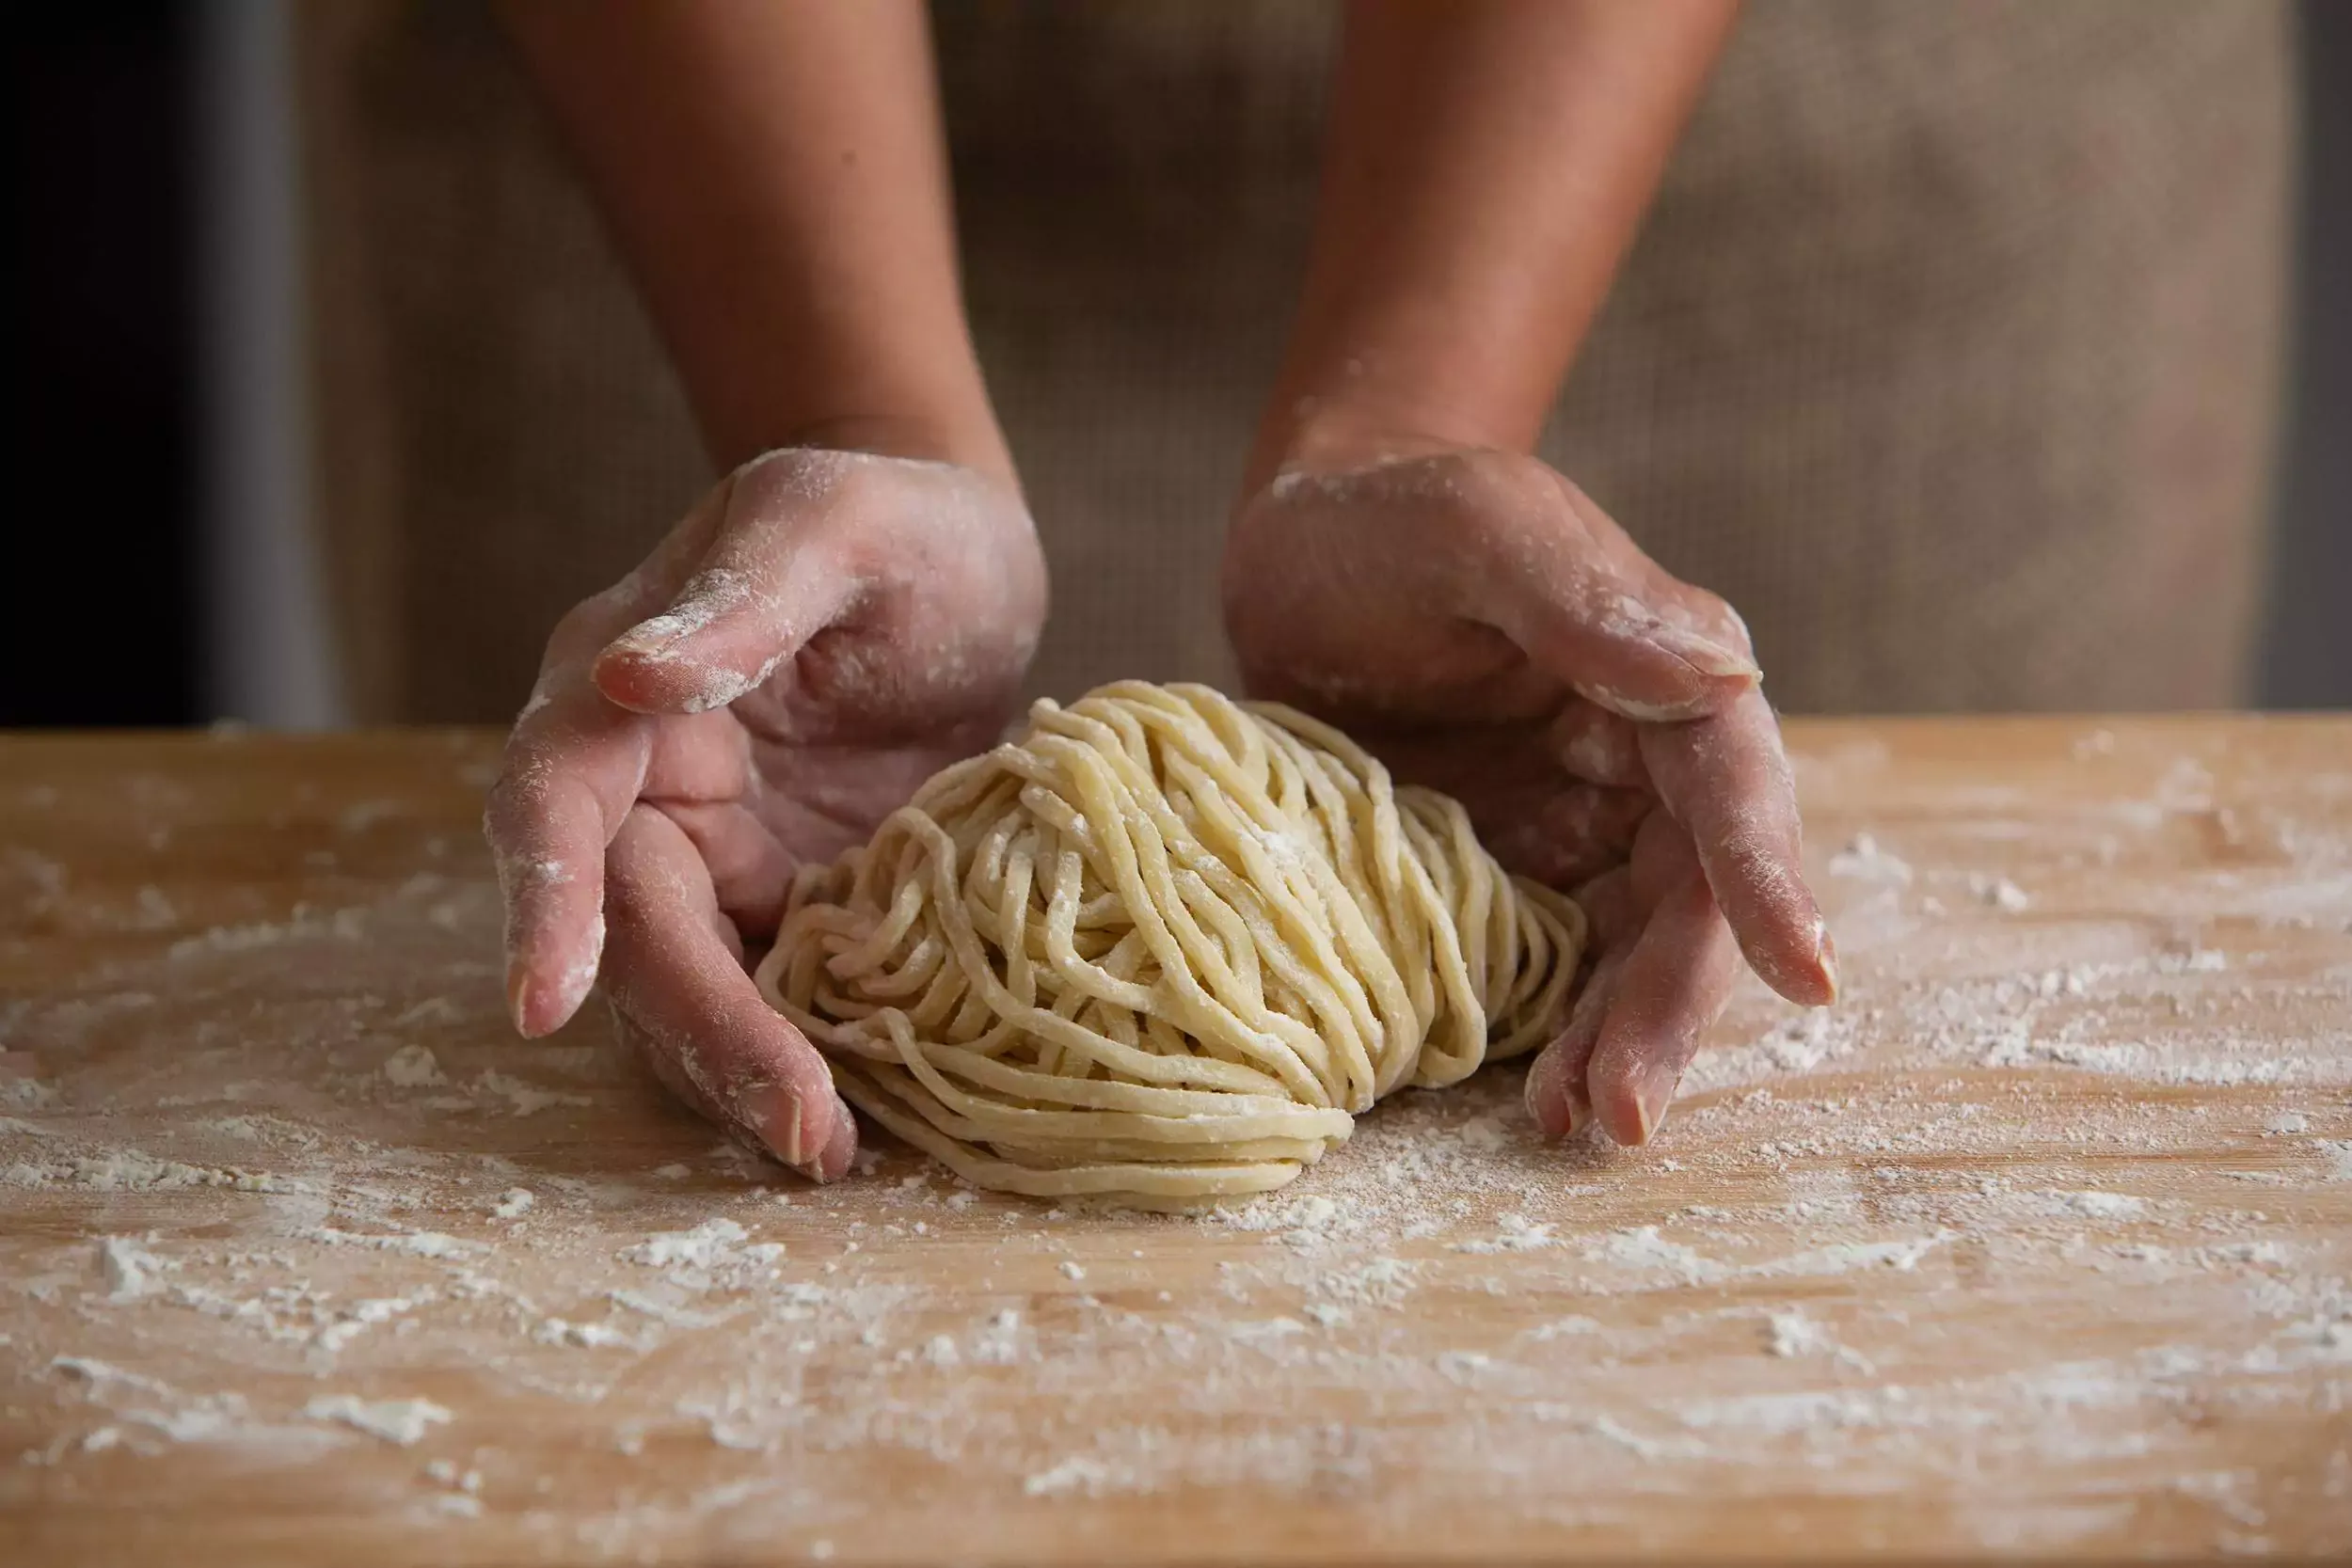 An image of hands shaping noodles